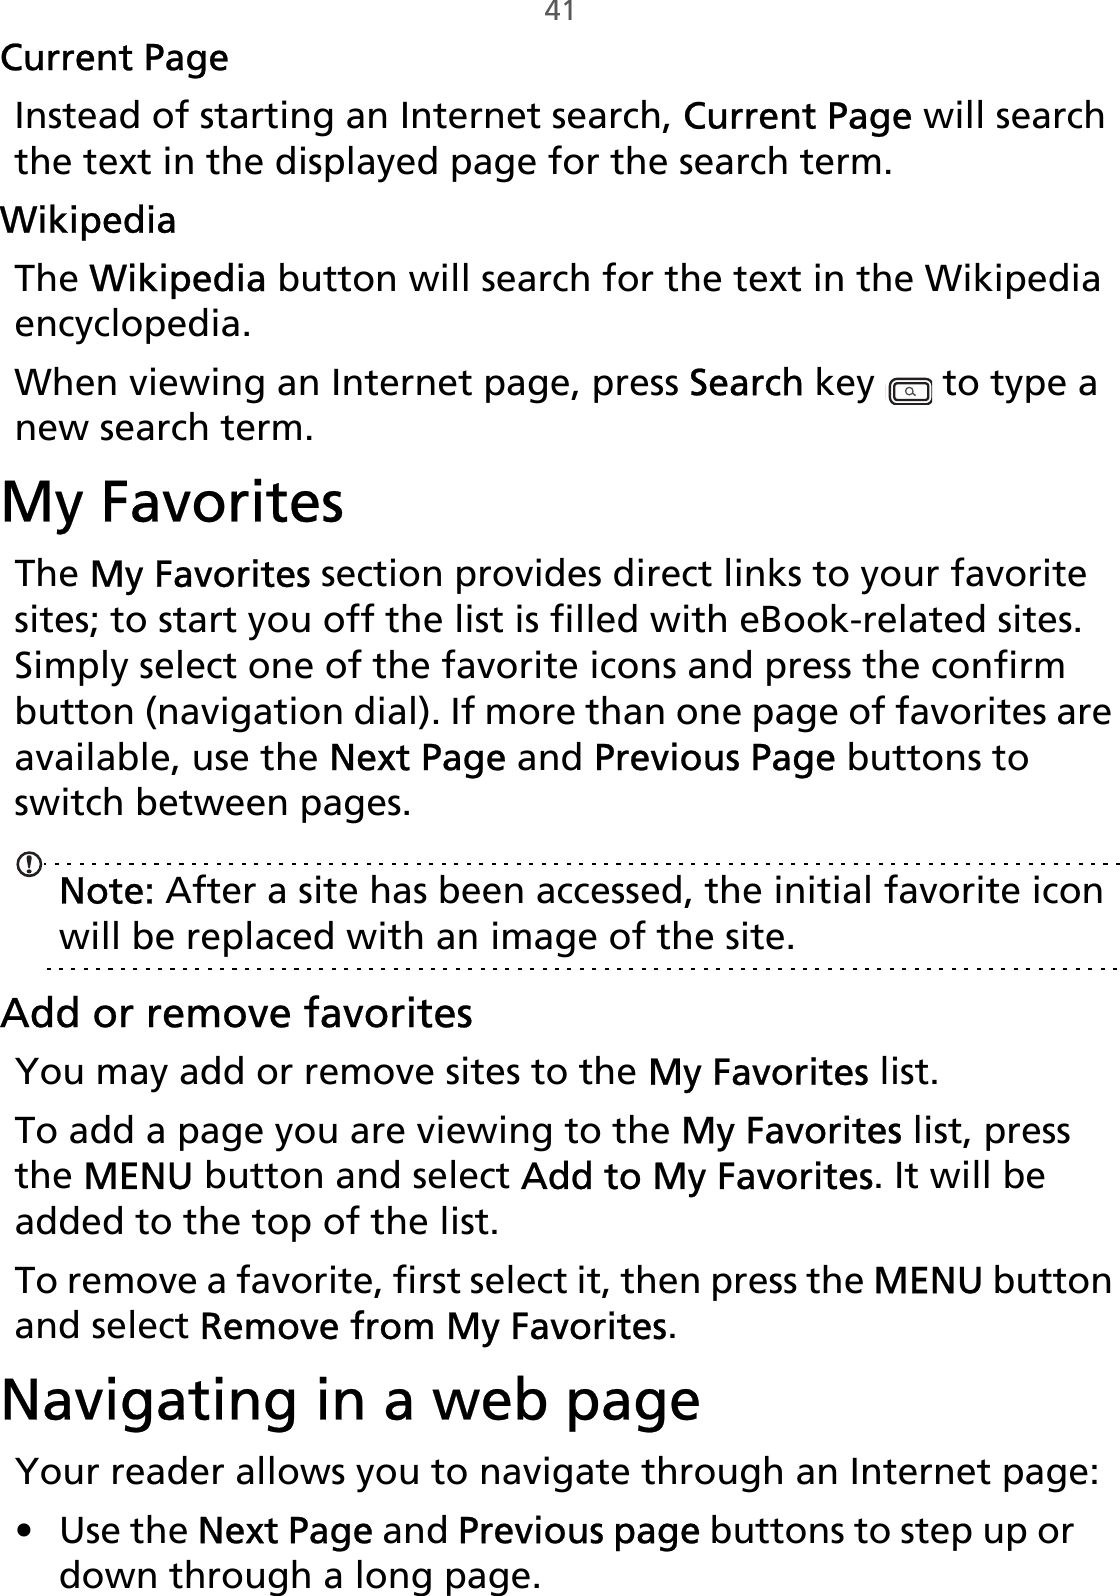 41Current PageInstead of starting an Internet search, Current Page will search the text in the displayed page for the search term.WikipediaThe Wikipedia button will search for the text in the Wikipedia encyclopedia.When viewing an Internet page, press Search key   to type a new search term.My FavoritesThe My Favorites section provides direct links to your favorite sites; to start you off the list is filled with eBook-related sites. Simply select one of the favorite icons and press the confirm button (navigation dial). If more than one page of favorites are available, use the Next Page and Previous Page buttons to switch between pages.Note: After a site has been accessed, the initial favorite icon will be replaced with an image of the site.Add or remove favoritesYou may add or remove sites to the My Favorites list. To add a page you are viewing to the My Favorites list, press the MENU button and select Add to My Favorites. It will be added to the top of the list. To remove a favorite, first select it, then press the MENU button and select Remove from My Favorites.Navigating in a web pageYour reader allows you to navigate through an Internet page:• Use the Next Page and Previous page buttons to step up or down through a long page. 